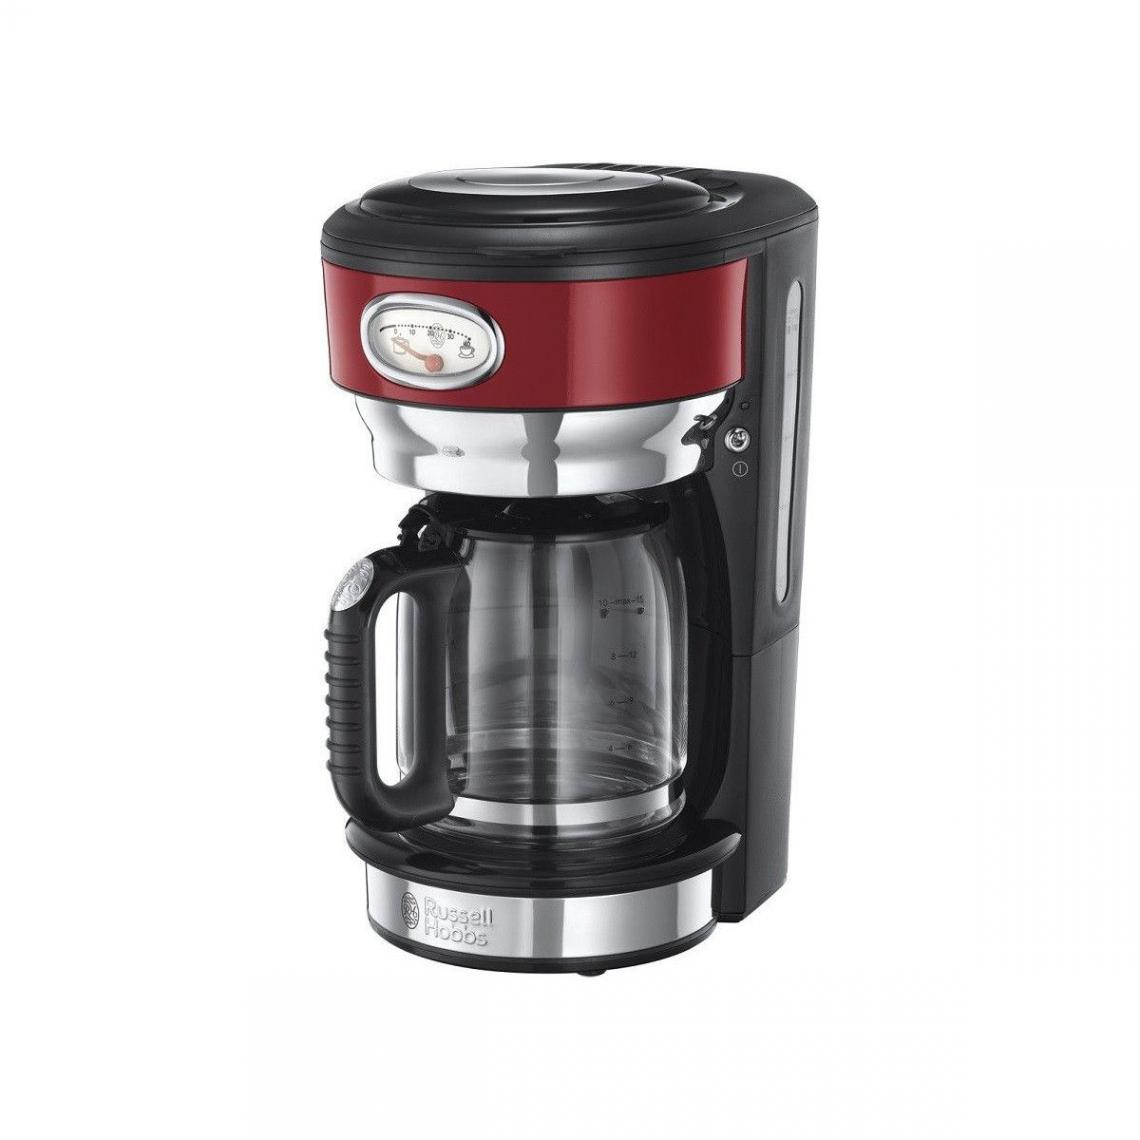 Russell Hobbs - russell hobbs - 2170056 - Expresso - Cafetière